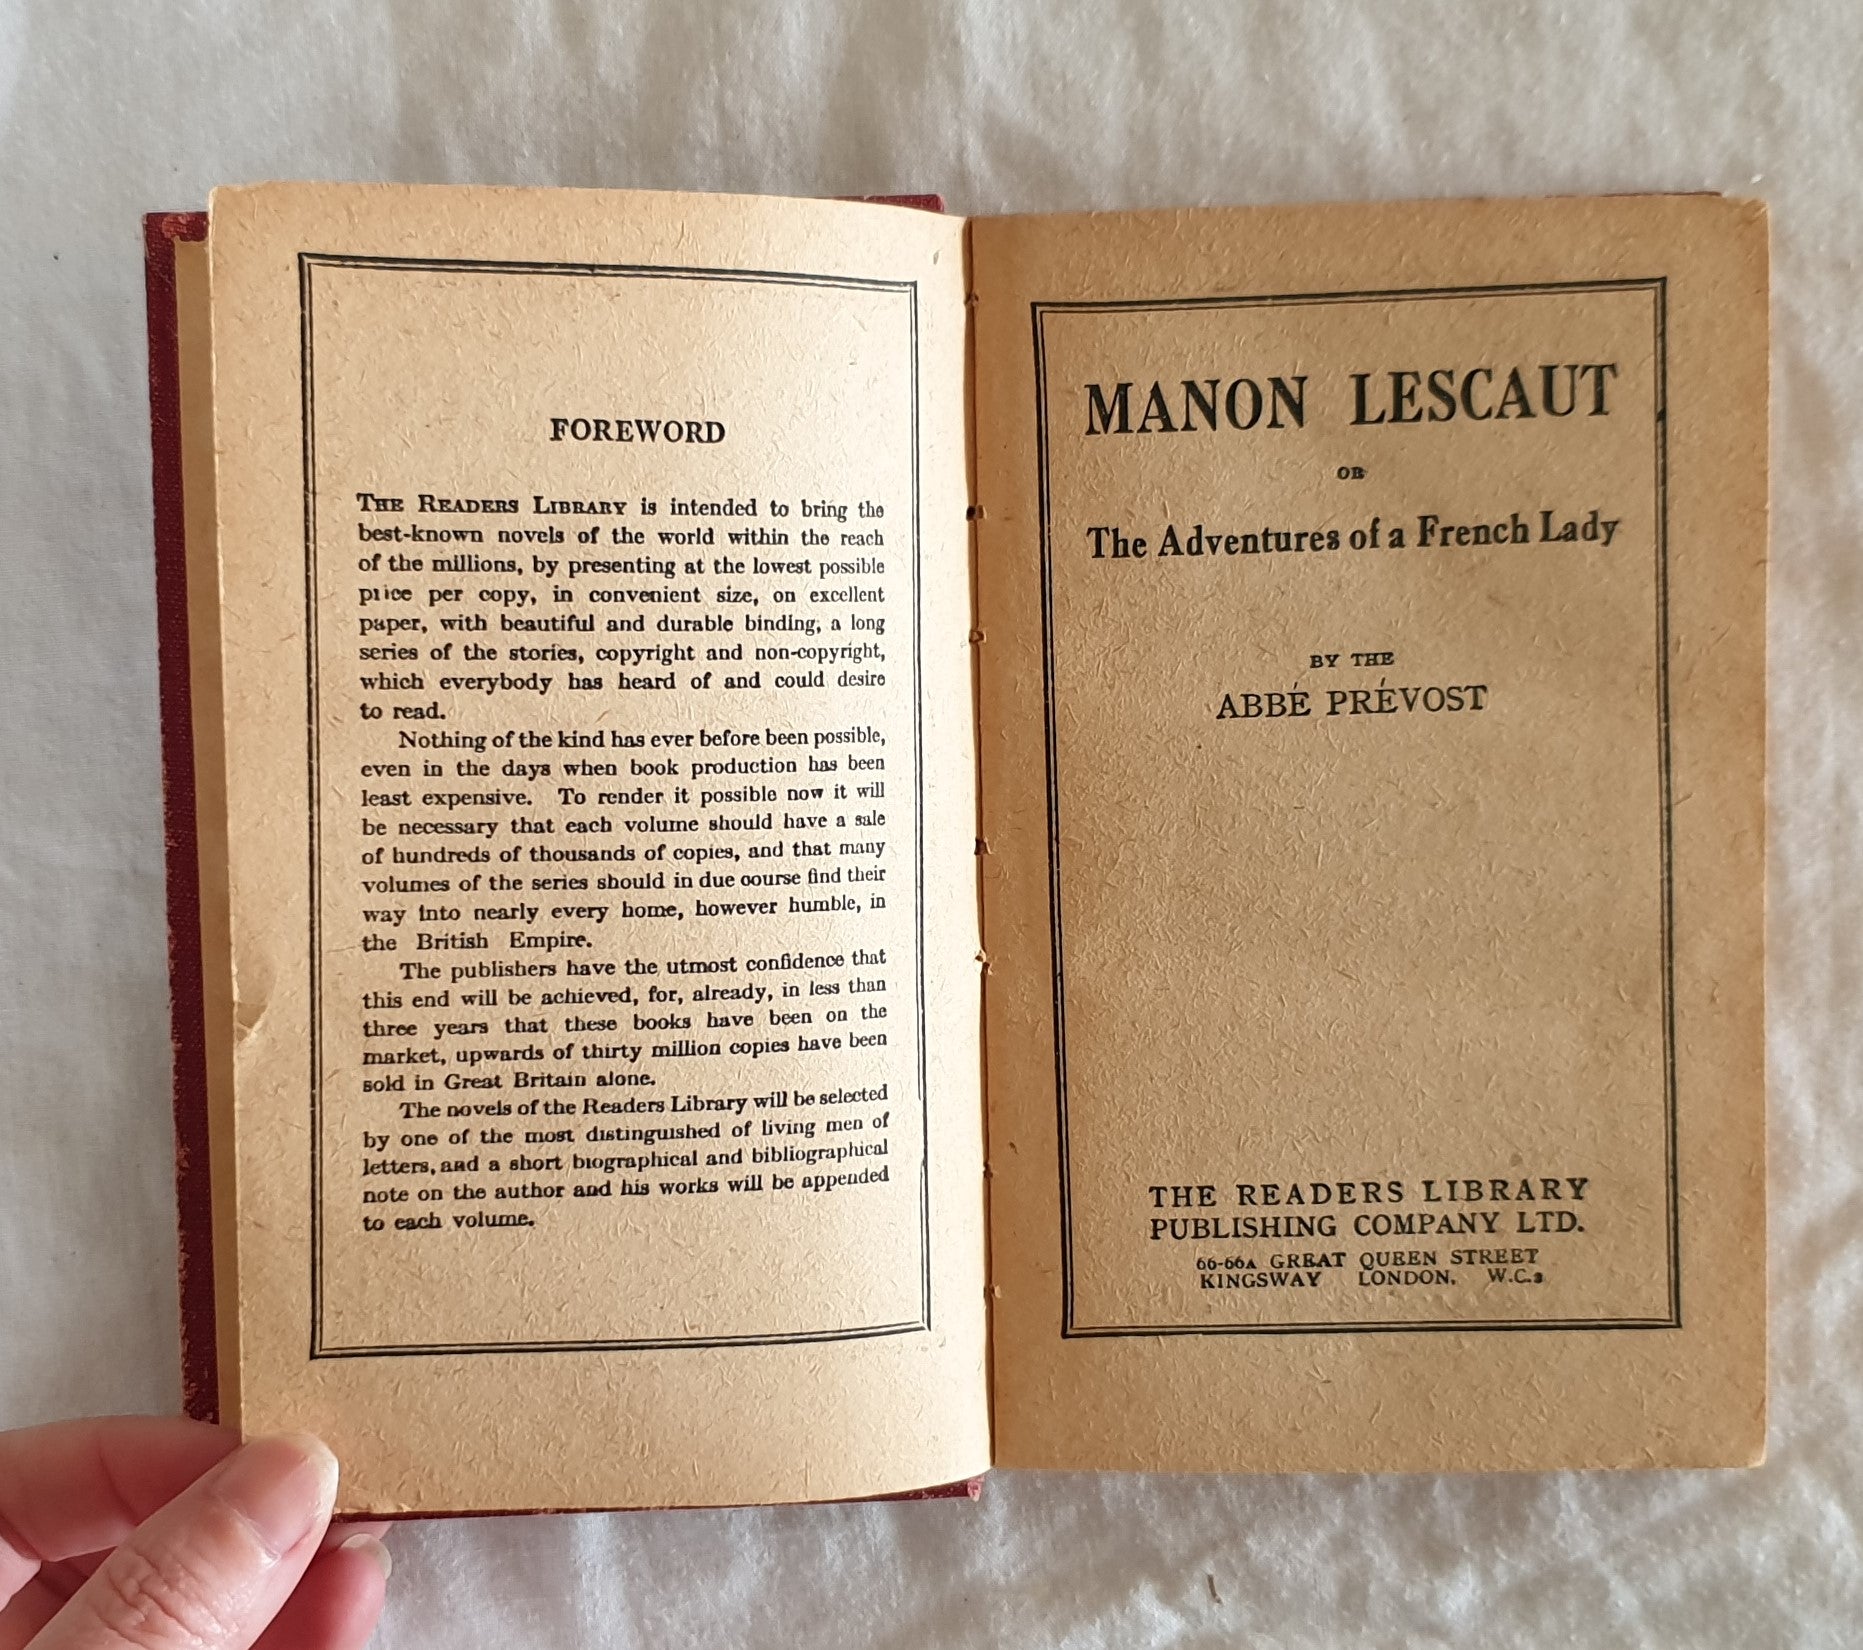 Manon Lescaut  or  The Adventures of a French Lady  by the Abbe Prevost